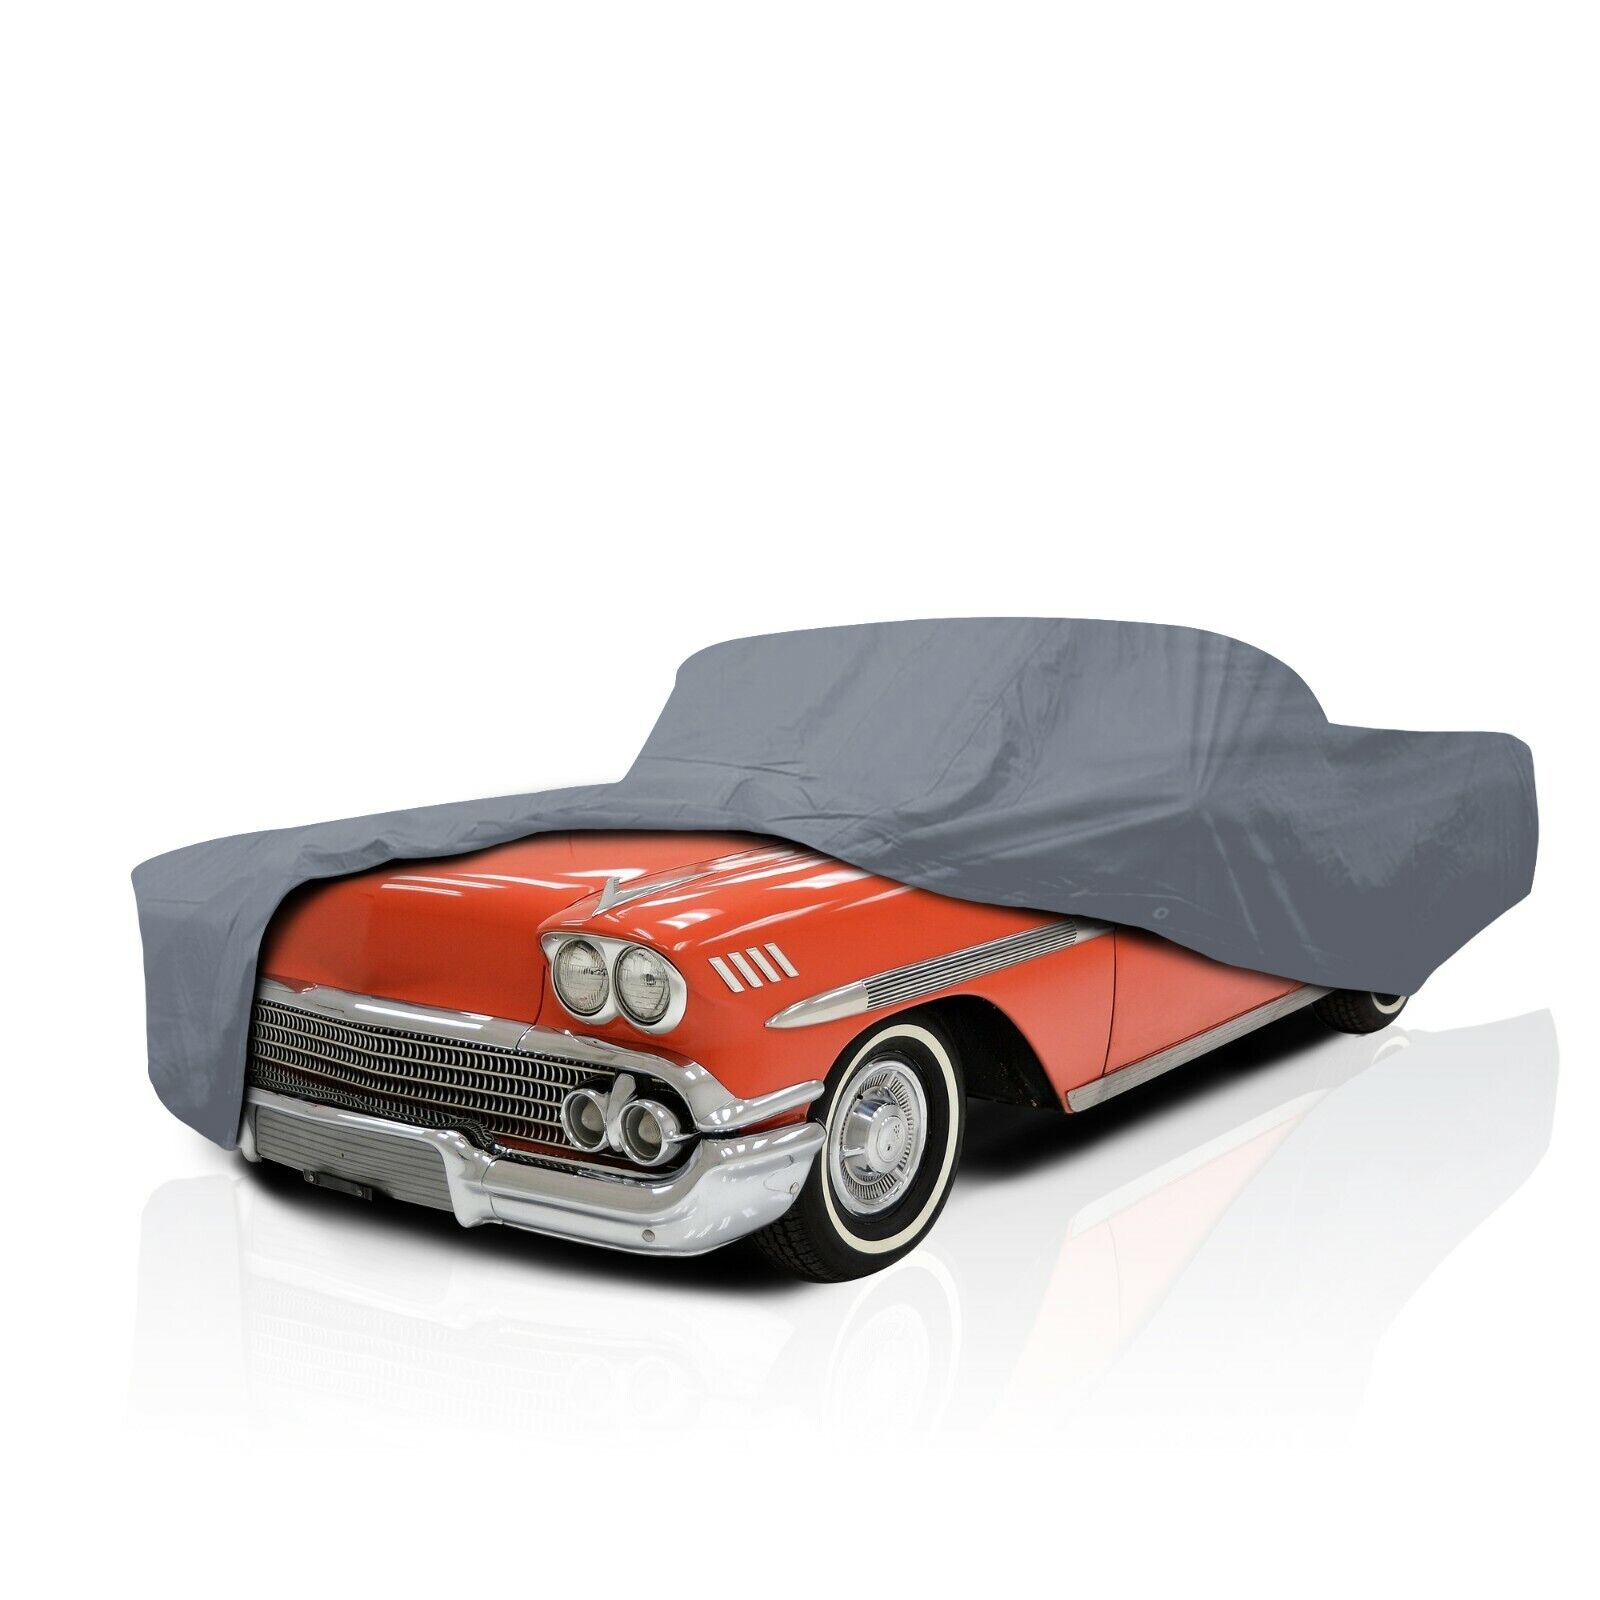 [CCT] 4 Layer Breathable Full Car Cover For Chevy Impala [1961-1964]